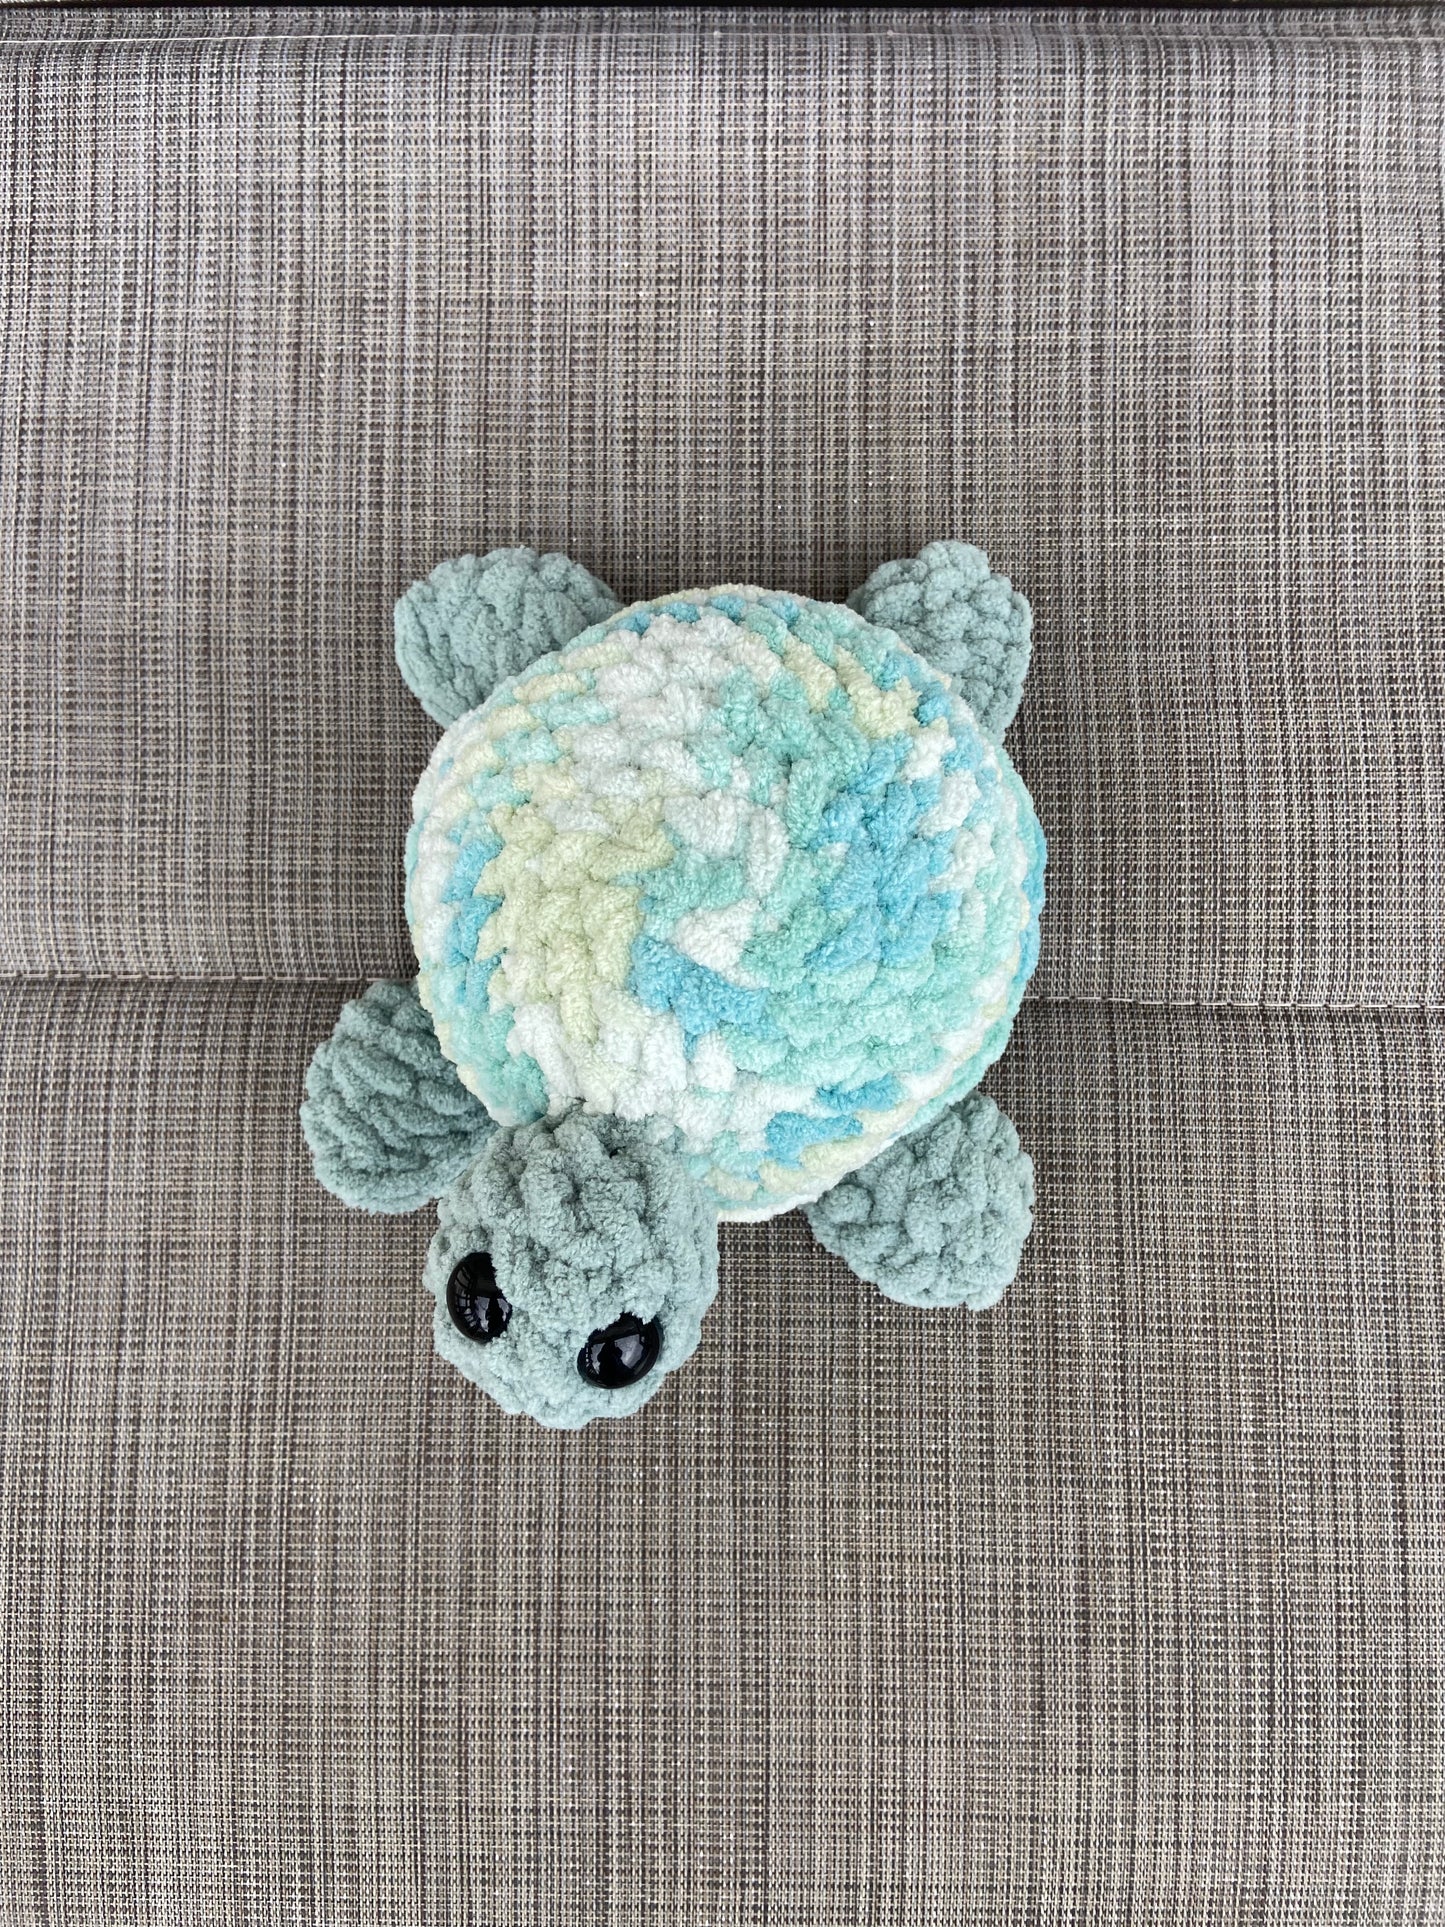 Handcrafted Crochet Turtle Plush: Adorable and Huggable Toy for All Ages